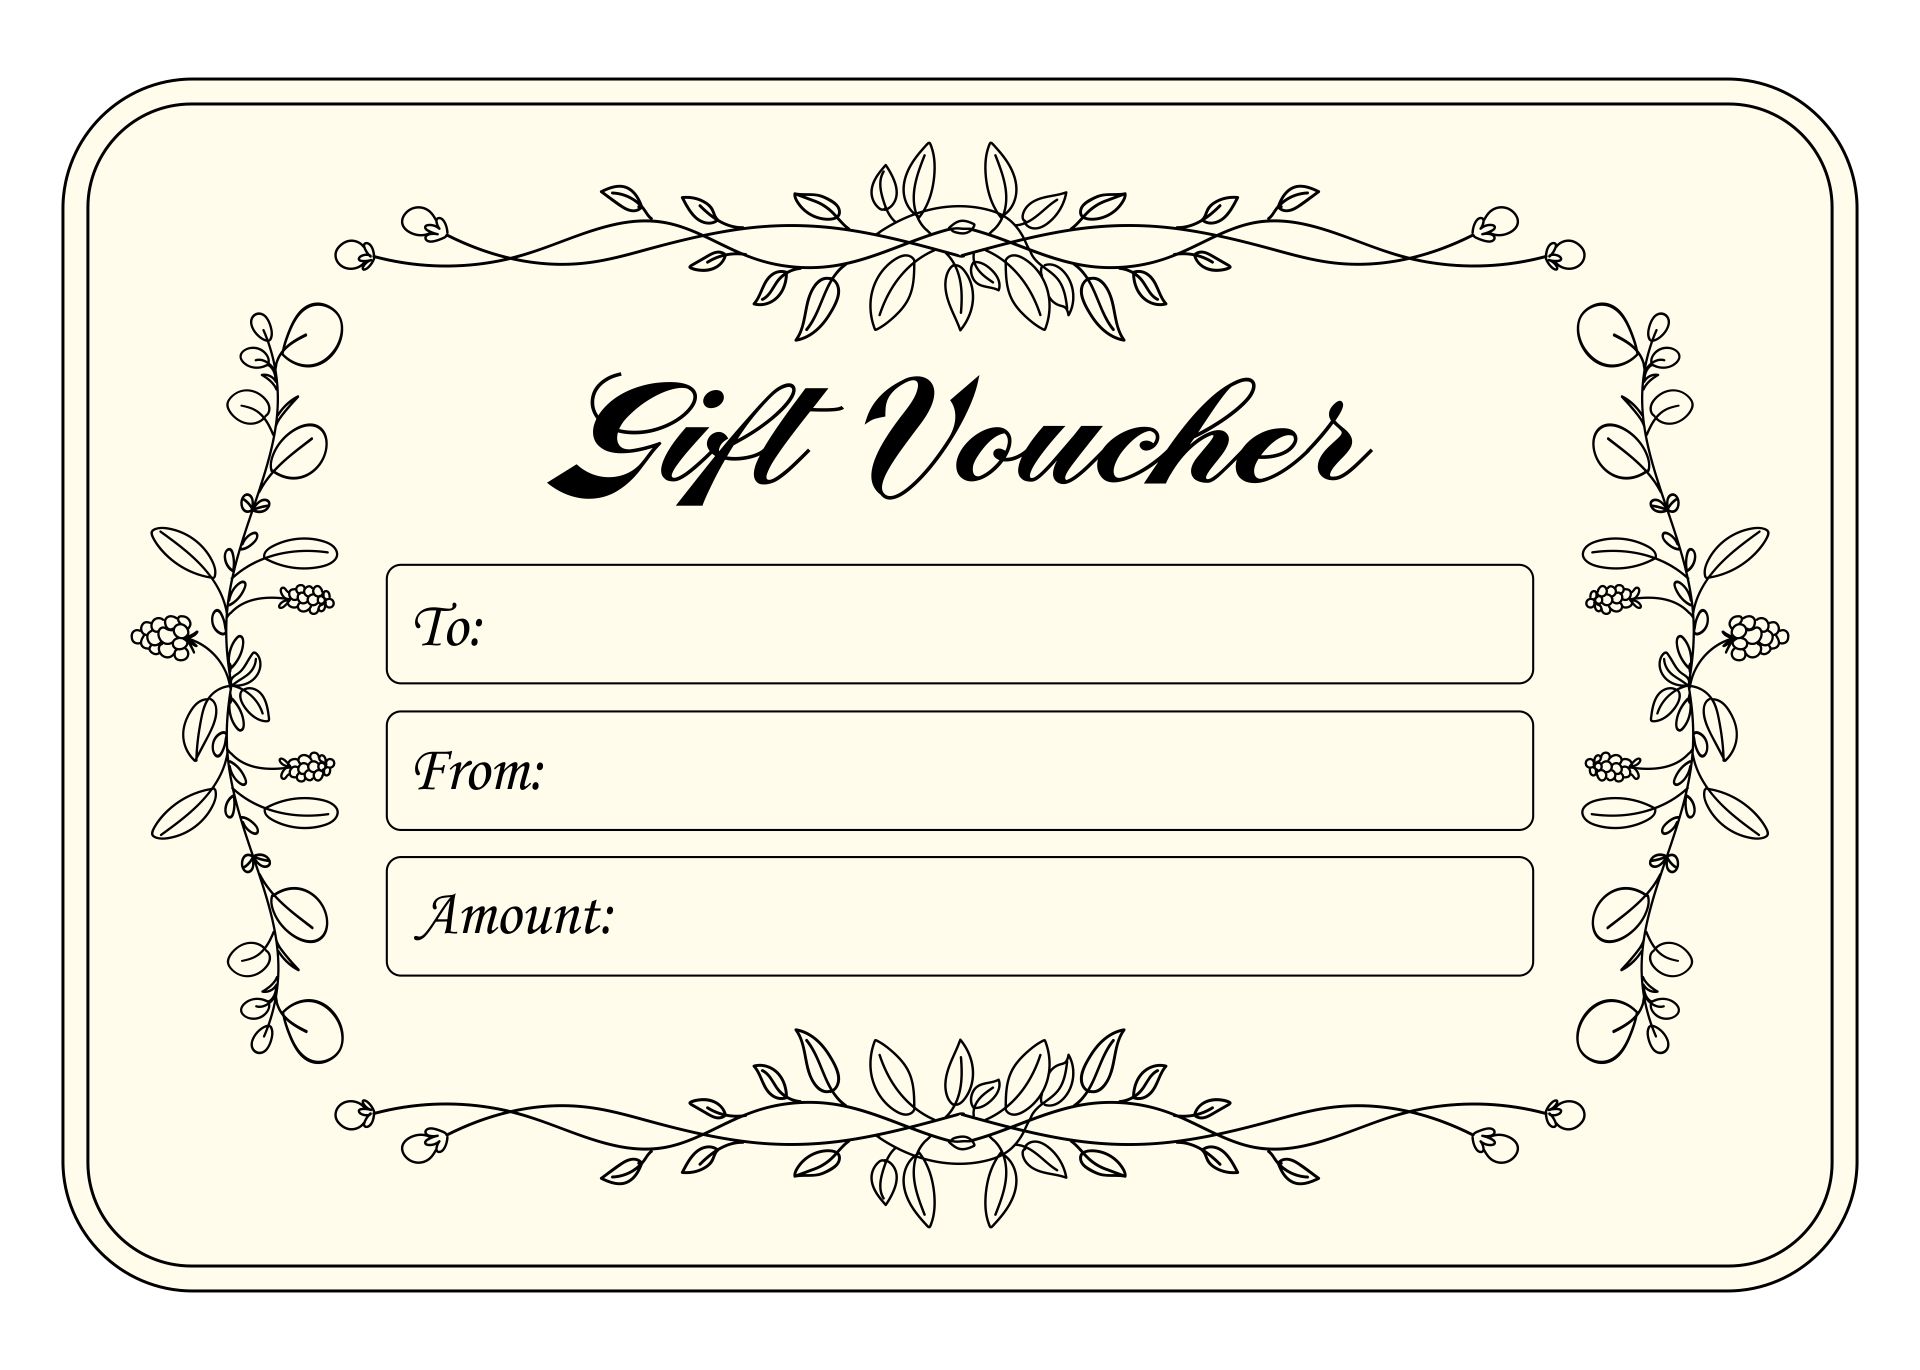 7 Best Images Of Printable Christmas Voucher Templates Christmas Gift 